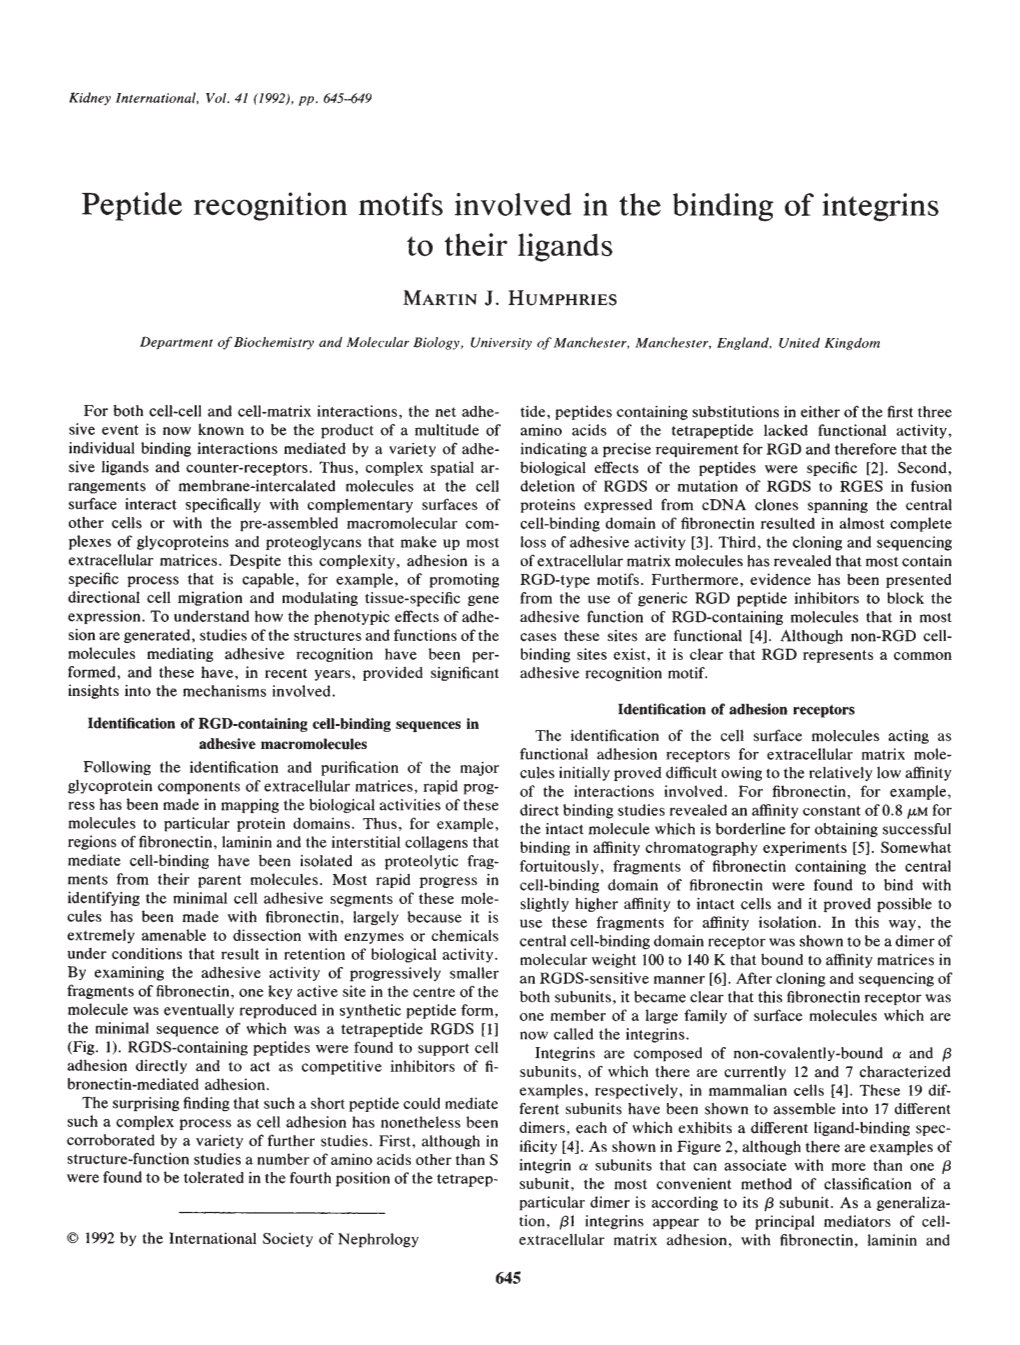 Peptide Recognition Motifs Involved in the Binding of Integrins to Their Ligands